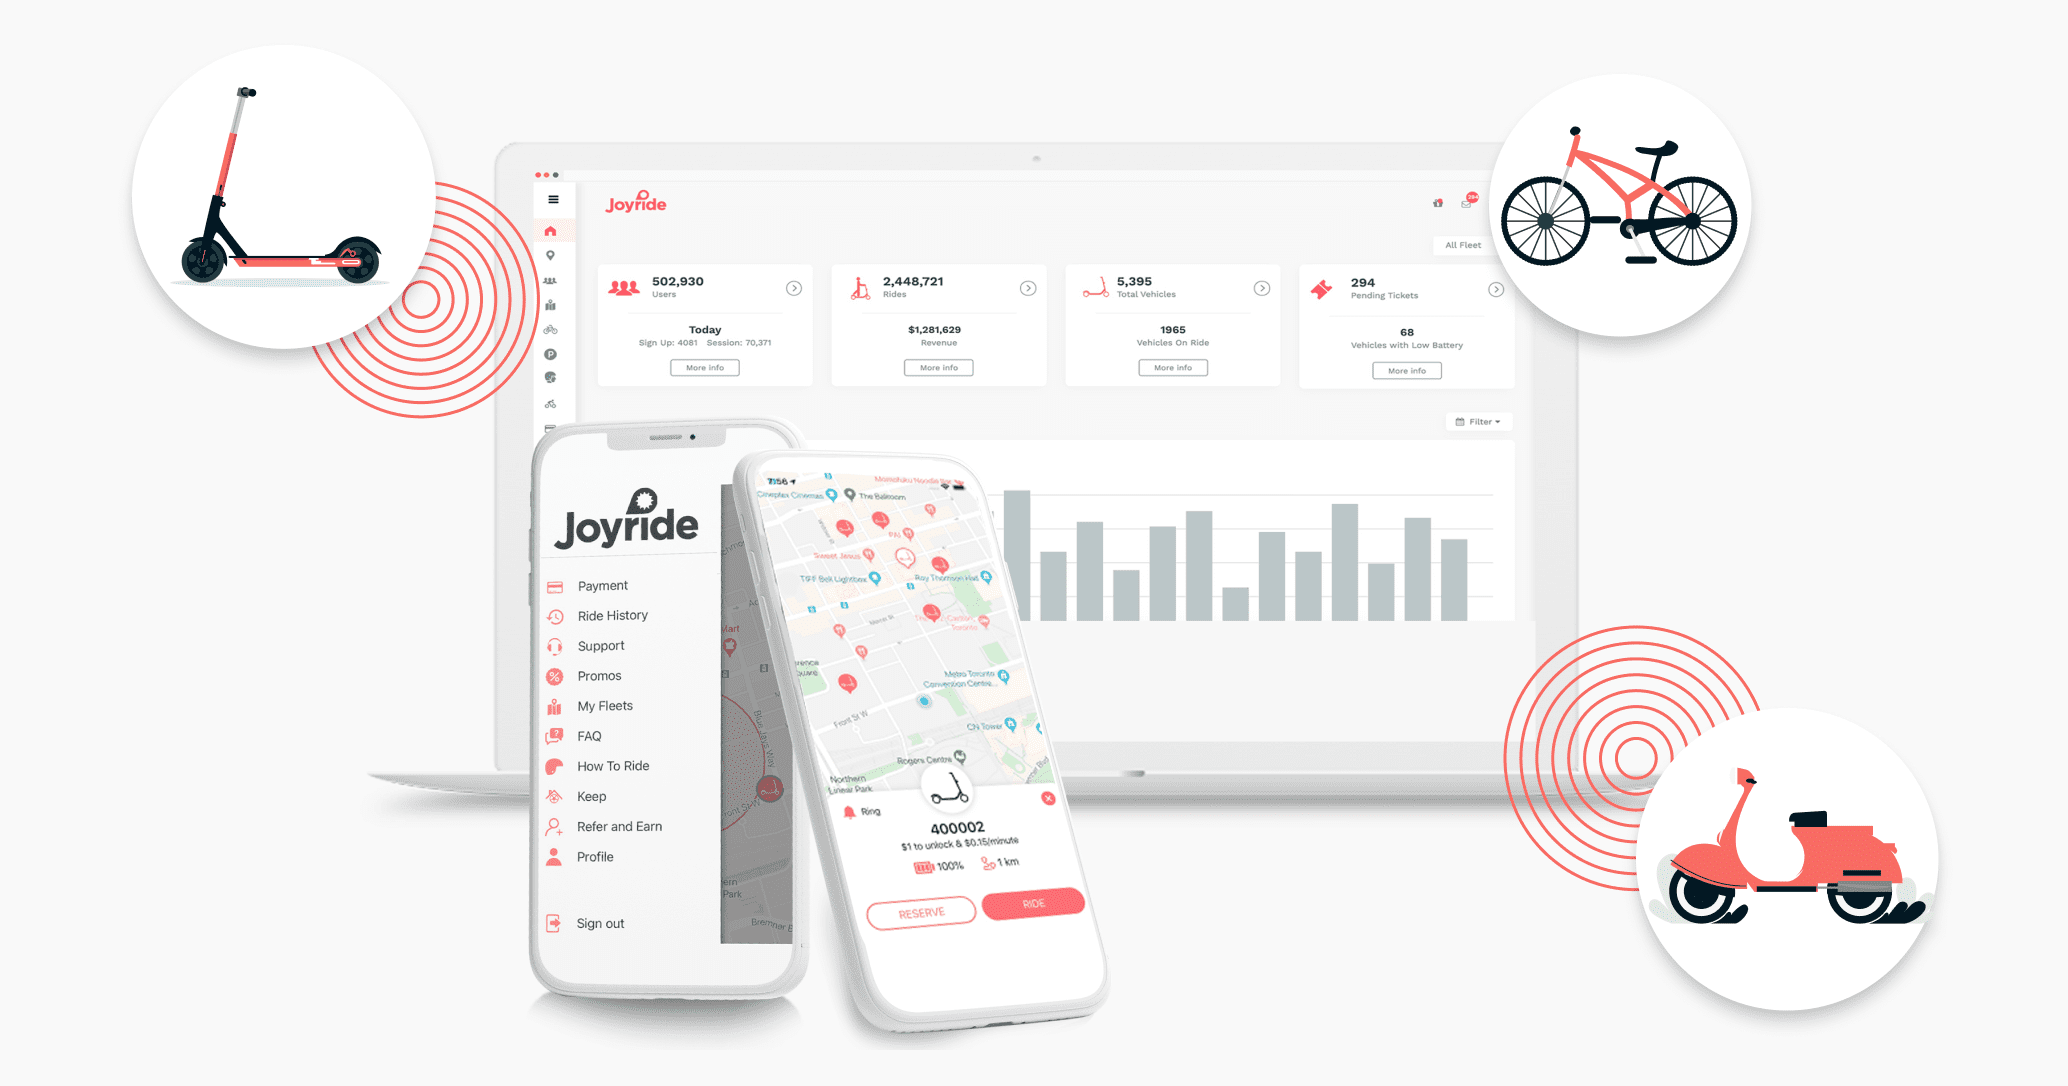 joyride is the world’s first “business in a box” solution for micromobility operators, and today the lid has been lifted wide open.